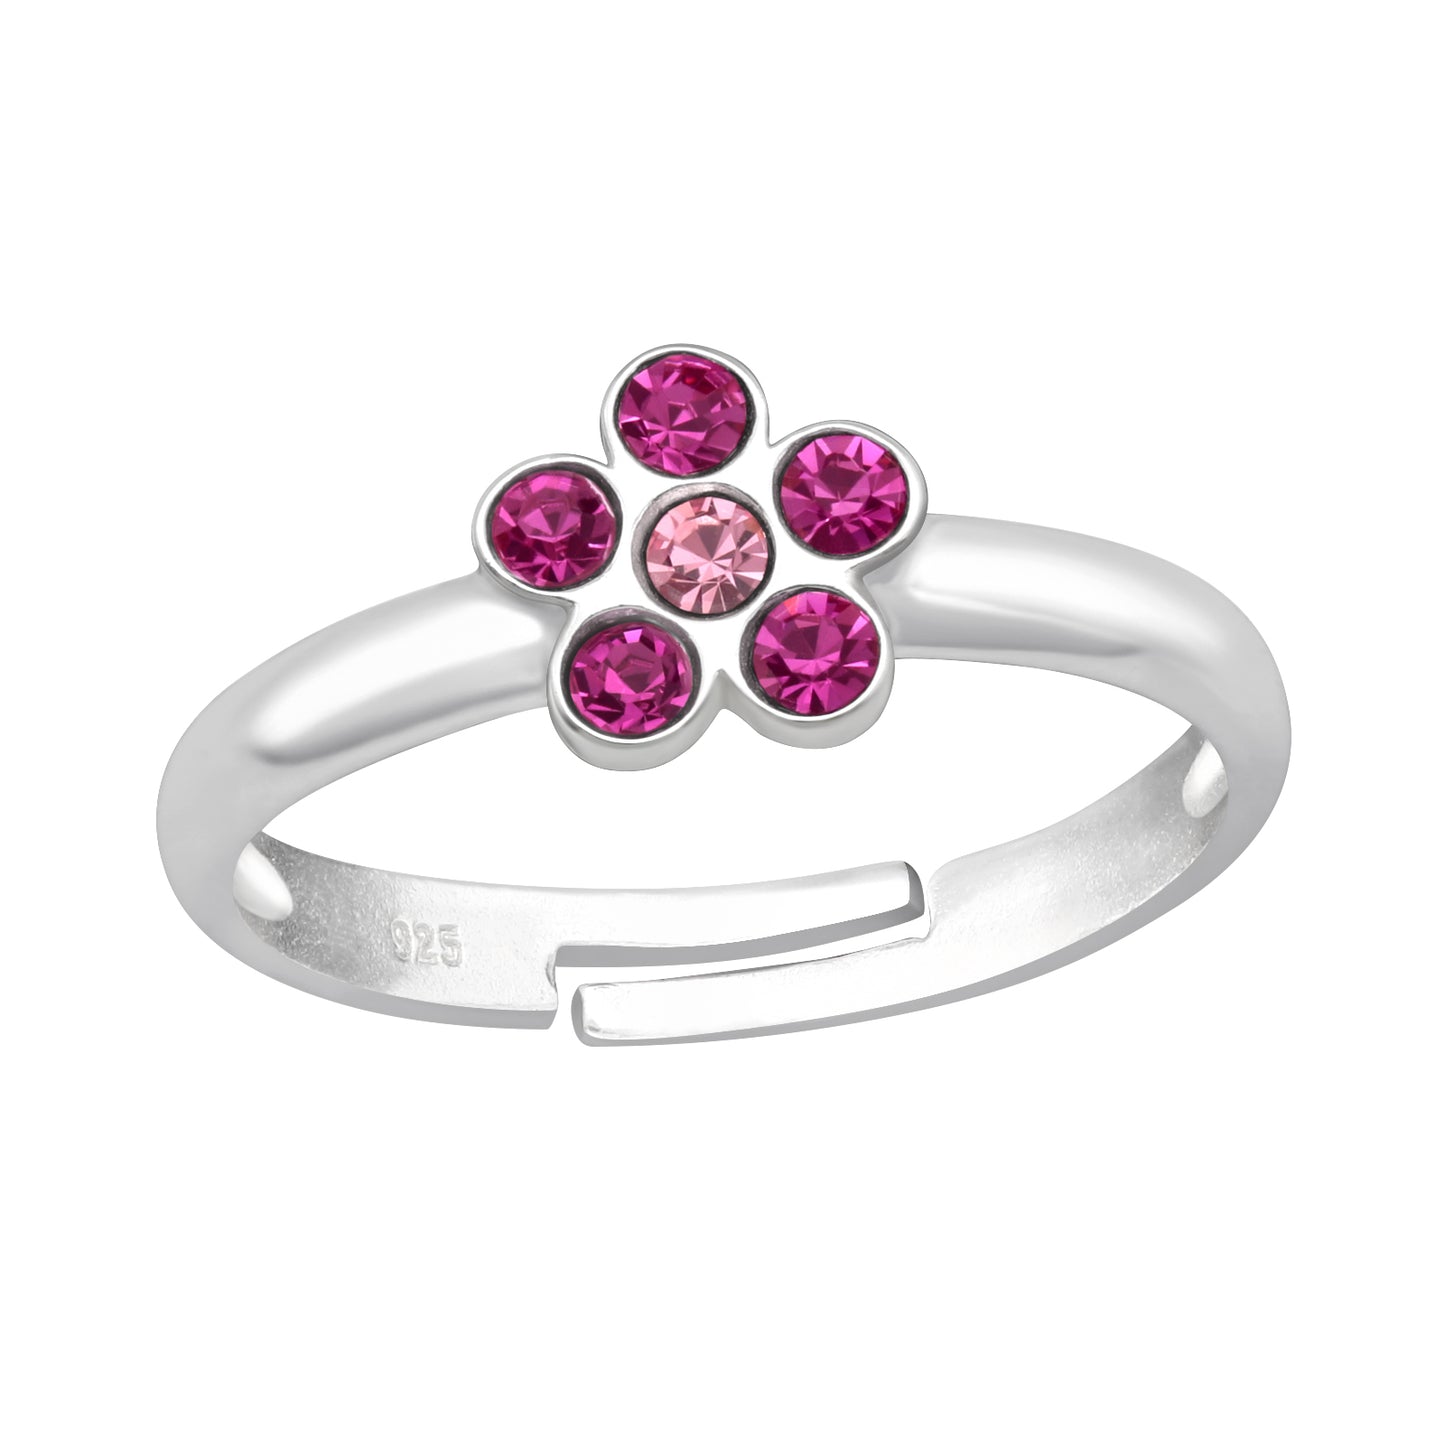 Cute pink blomst ring